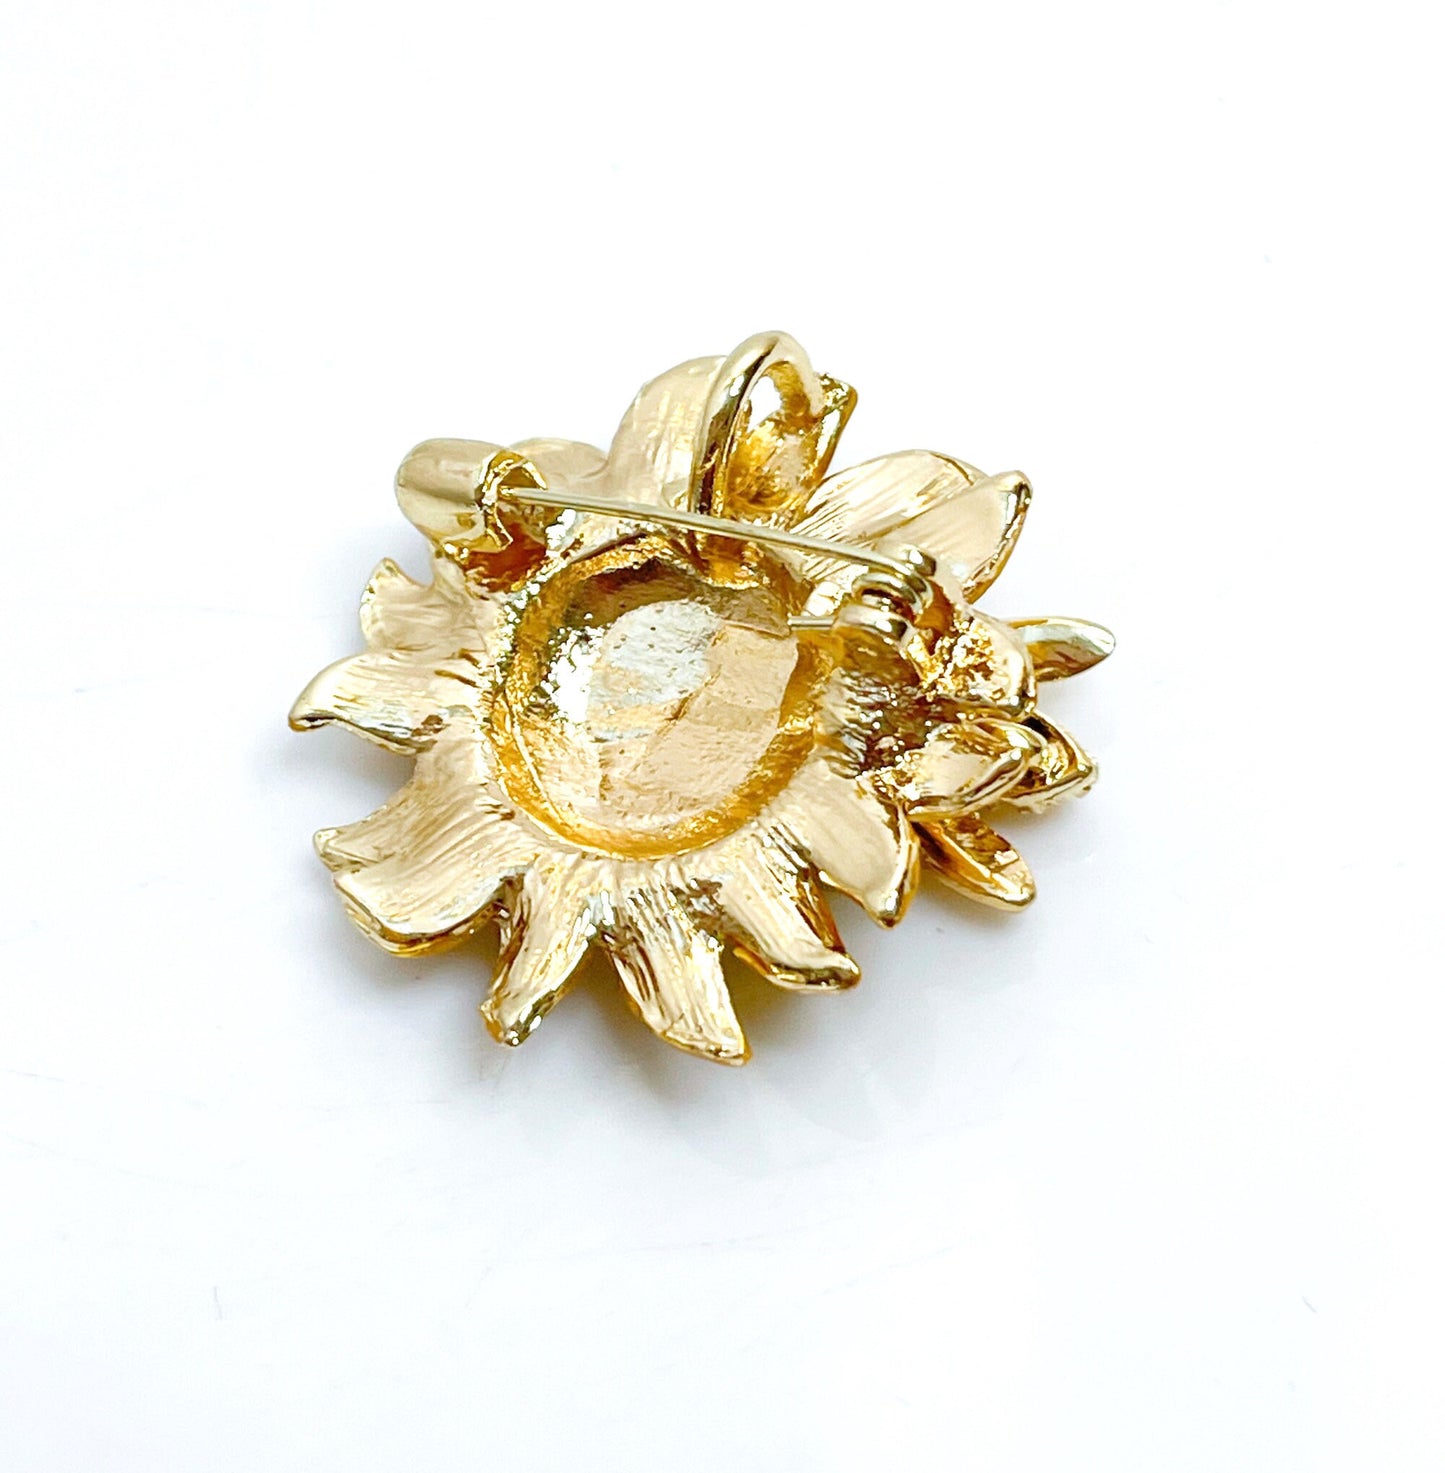 Vintage Sunflower with Bee Brooch, Gold Flower Pin, Flower Jacket Pin, Glittery Scarf Pin, Brooches For Women